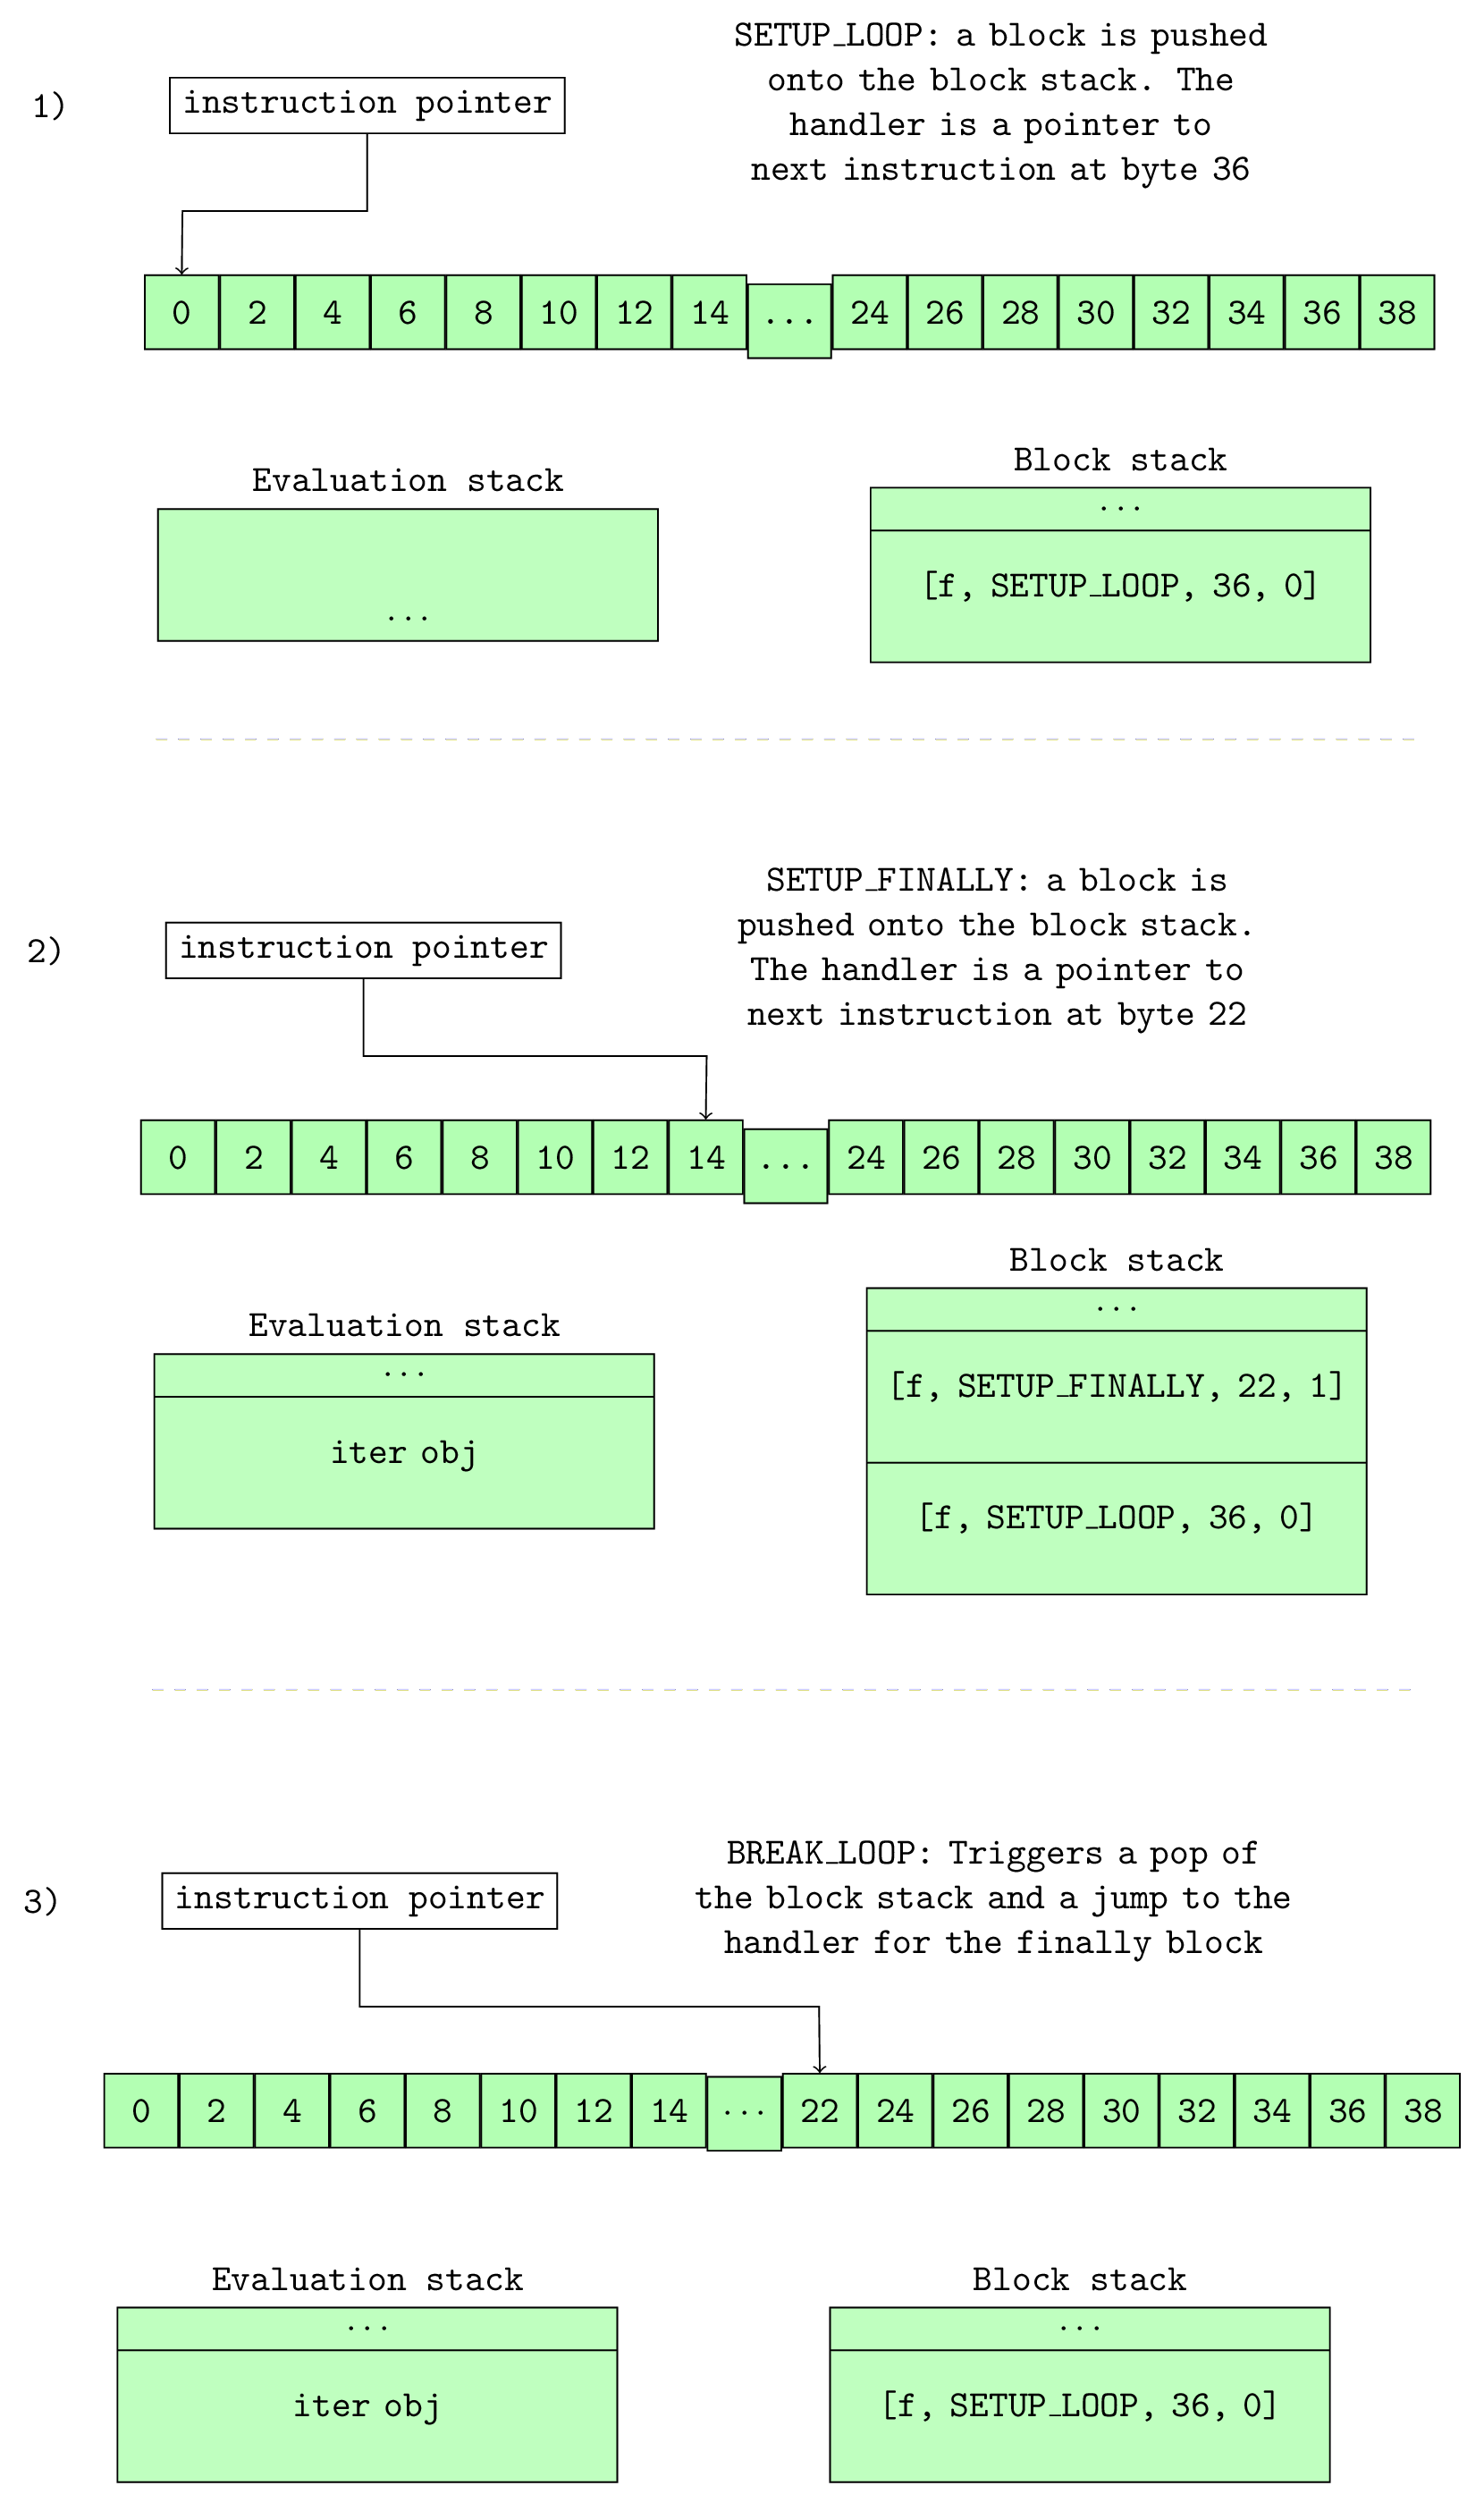 Figure 10.0: How the block stack changes with SETUP_* instructions